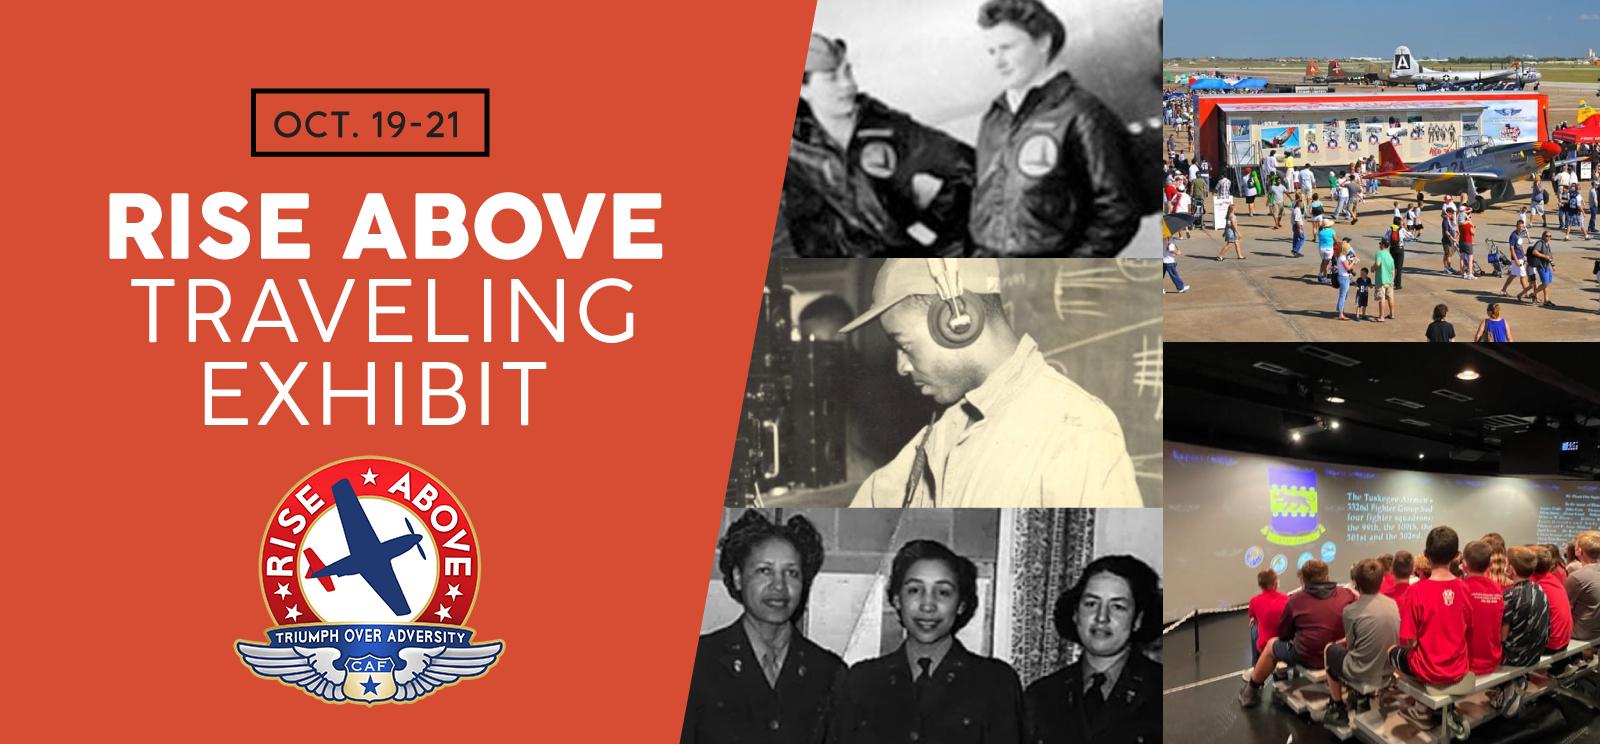 Images on the right: collage of modern photographs of the mobile theater and vintage photographs of Black and women pilots. Text on the left: Rise Above / Traveling Exhibit